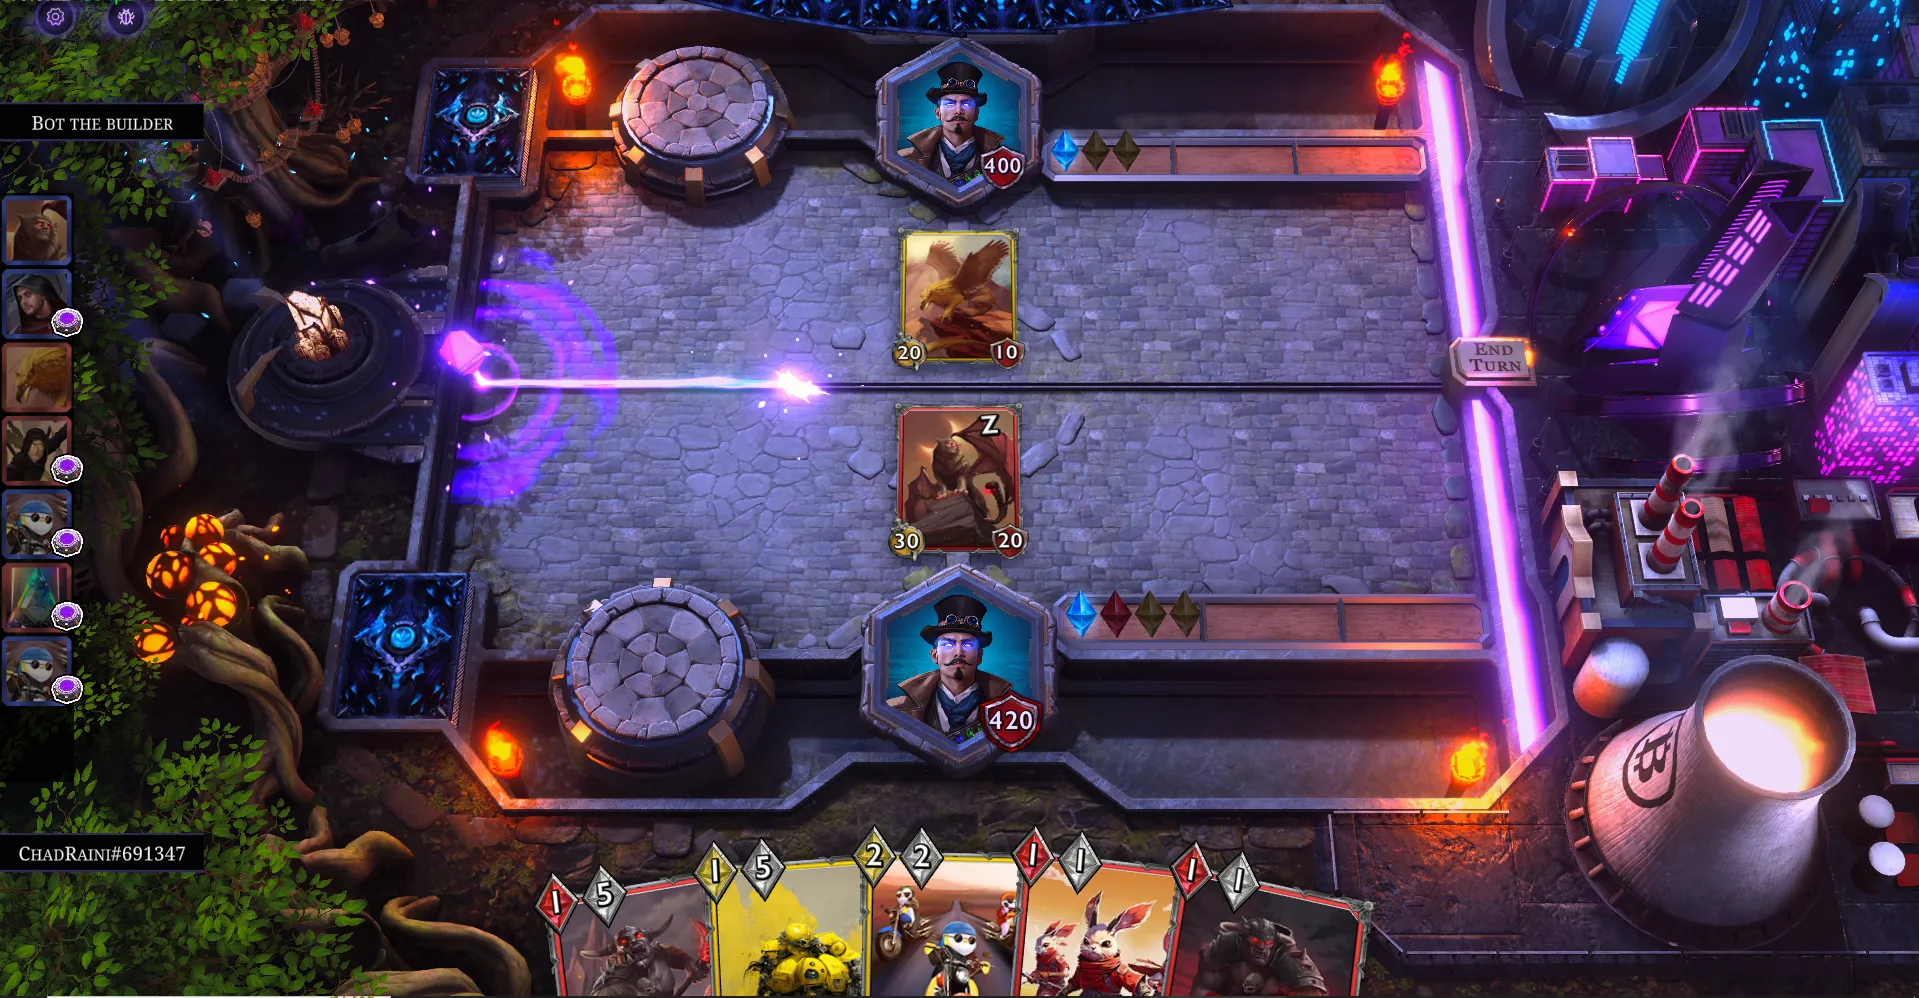 The Raini The Lords of Light game interface vividly displays two opponents fiercely engaged in a strategic card battle, each pursuing victory.